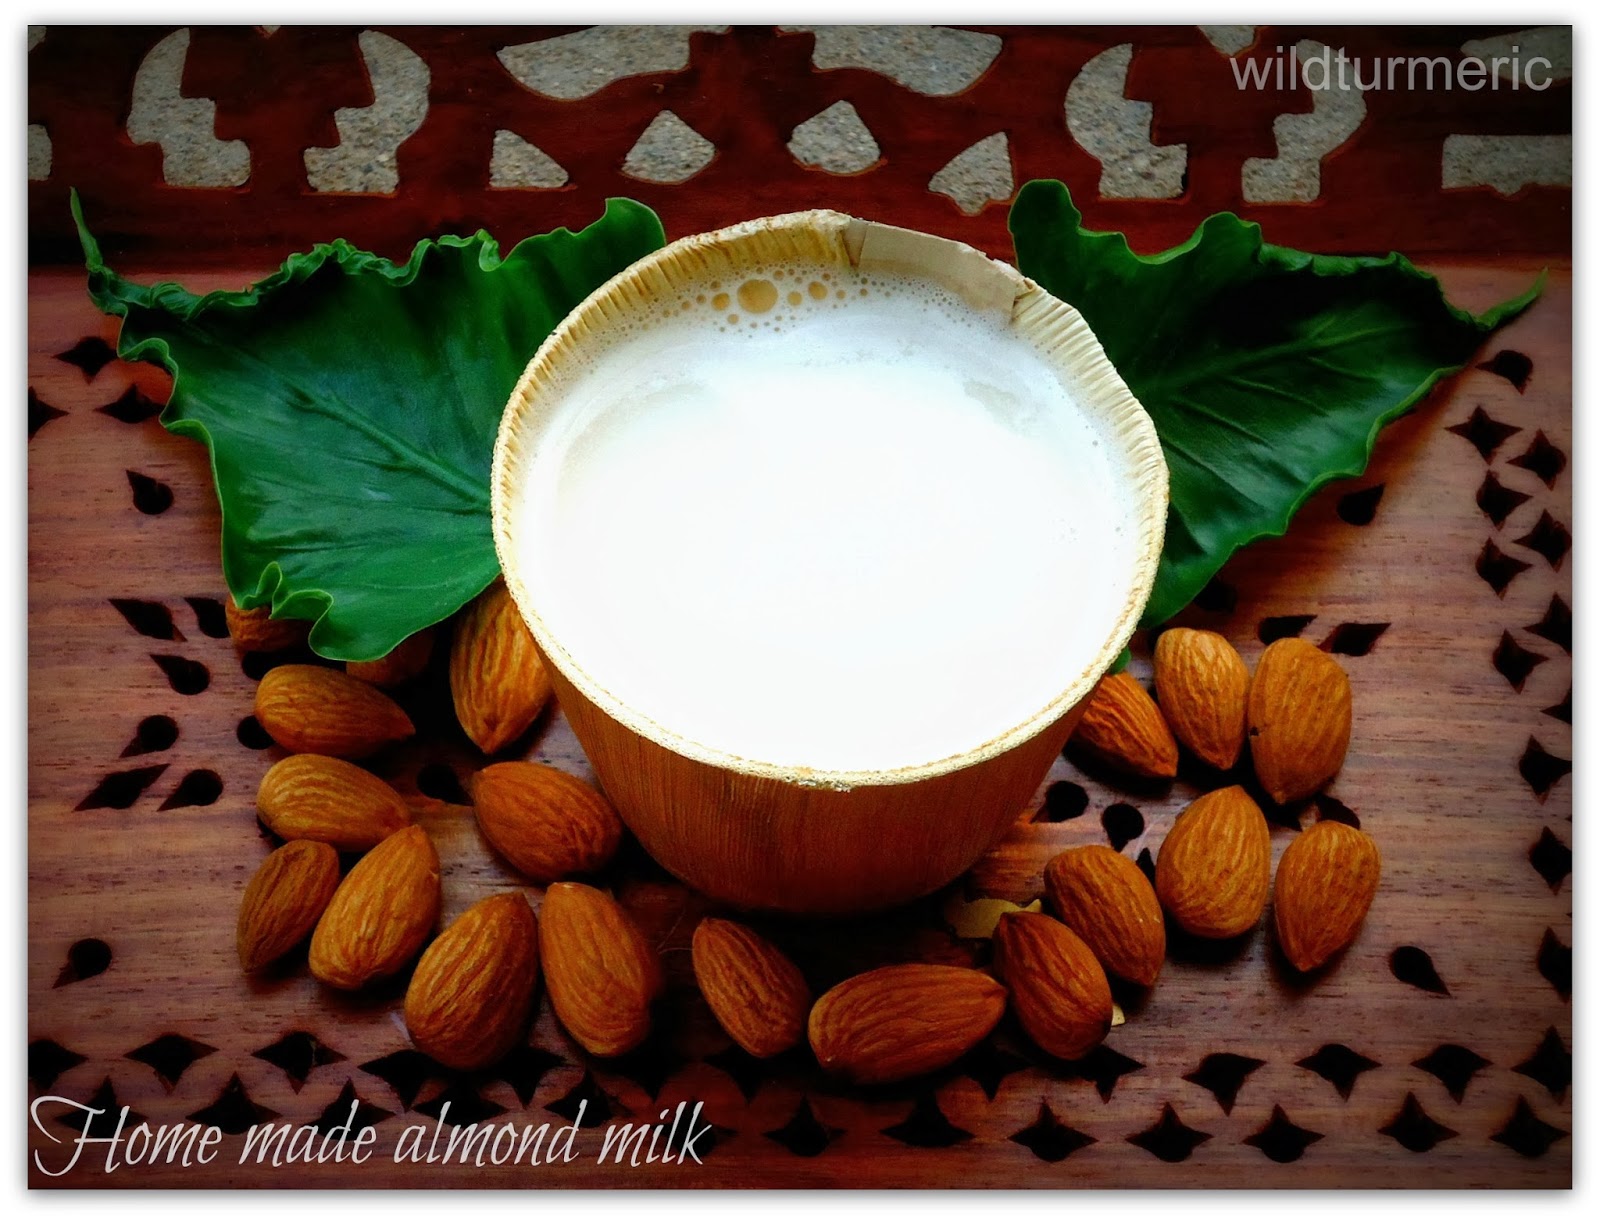 5 Top Benefits & Uses of Almond Milk For Hair, Skin & Health - Wildturmeric